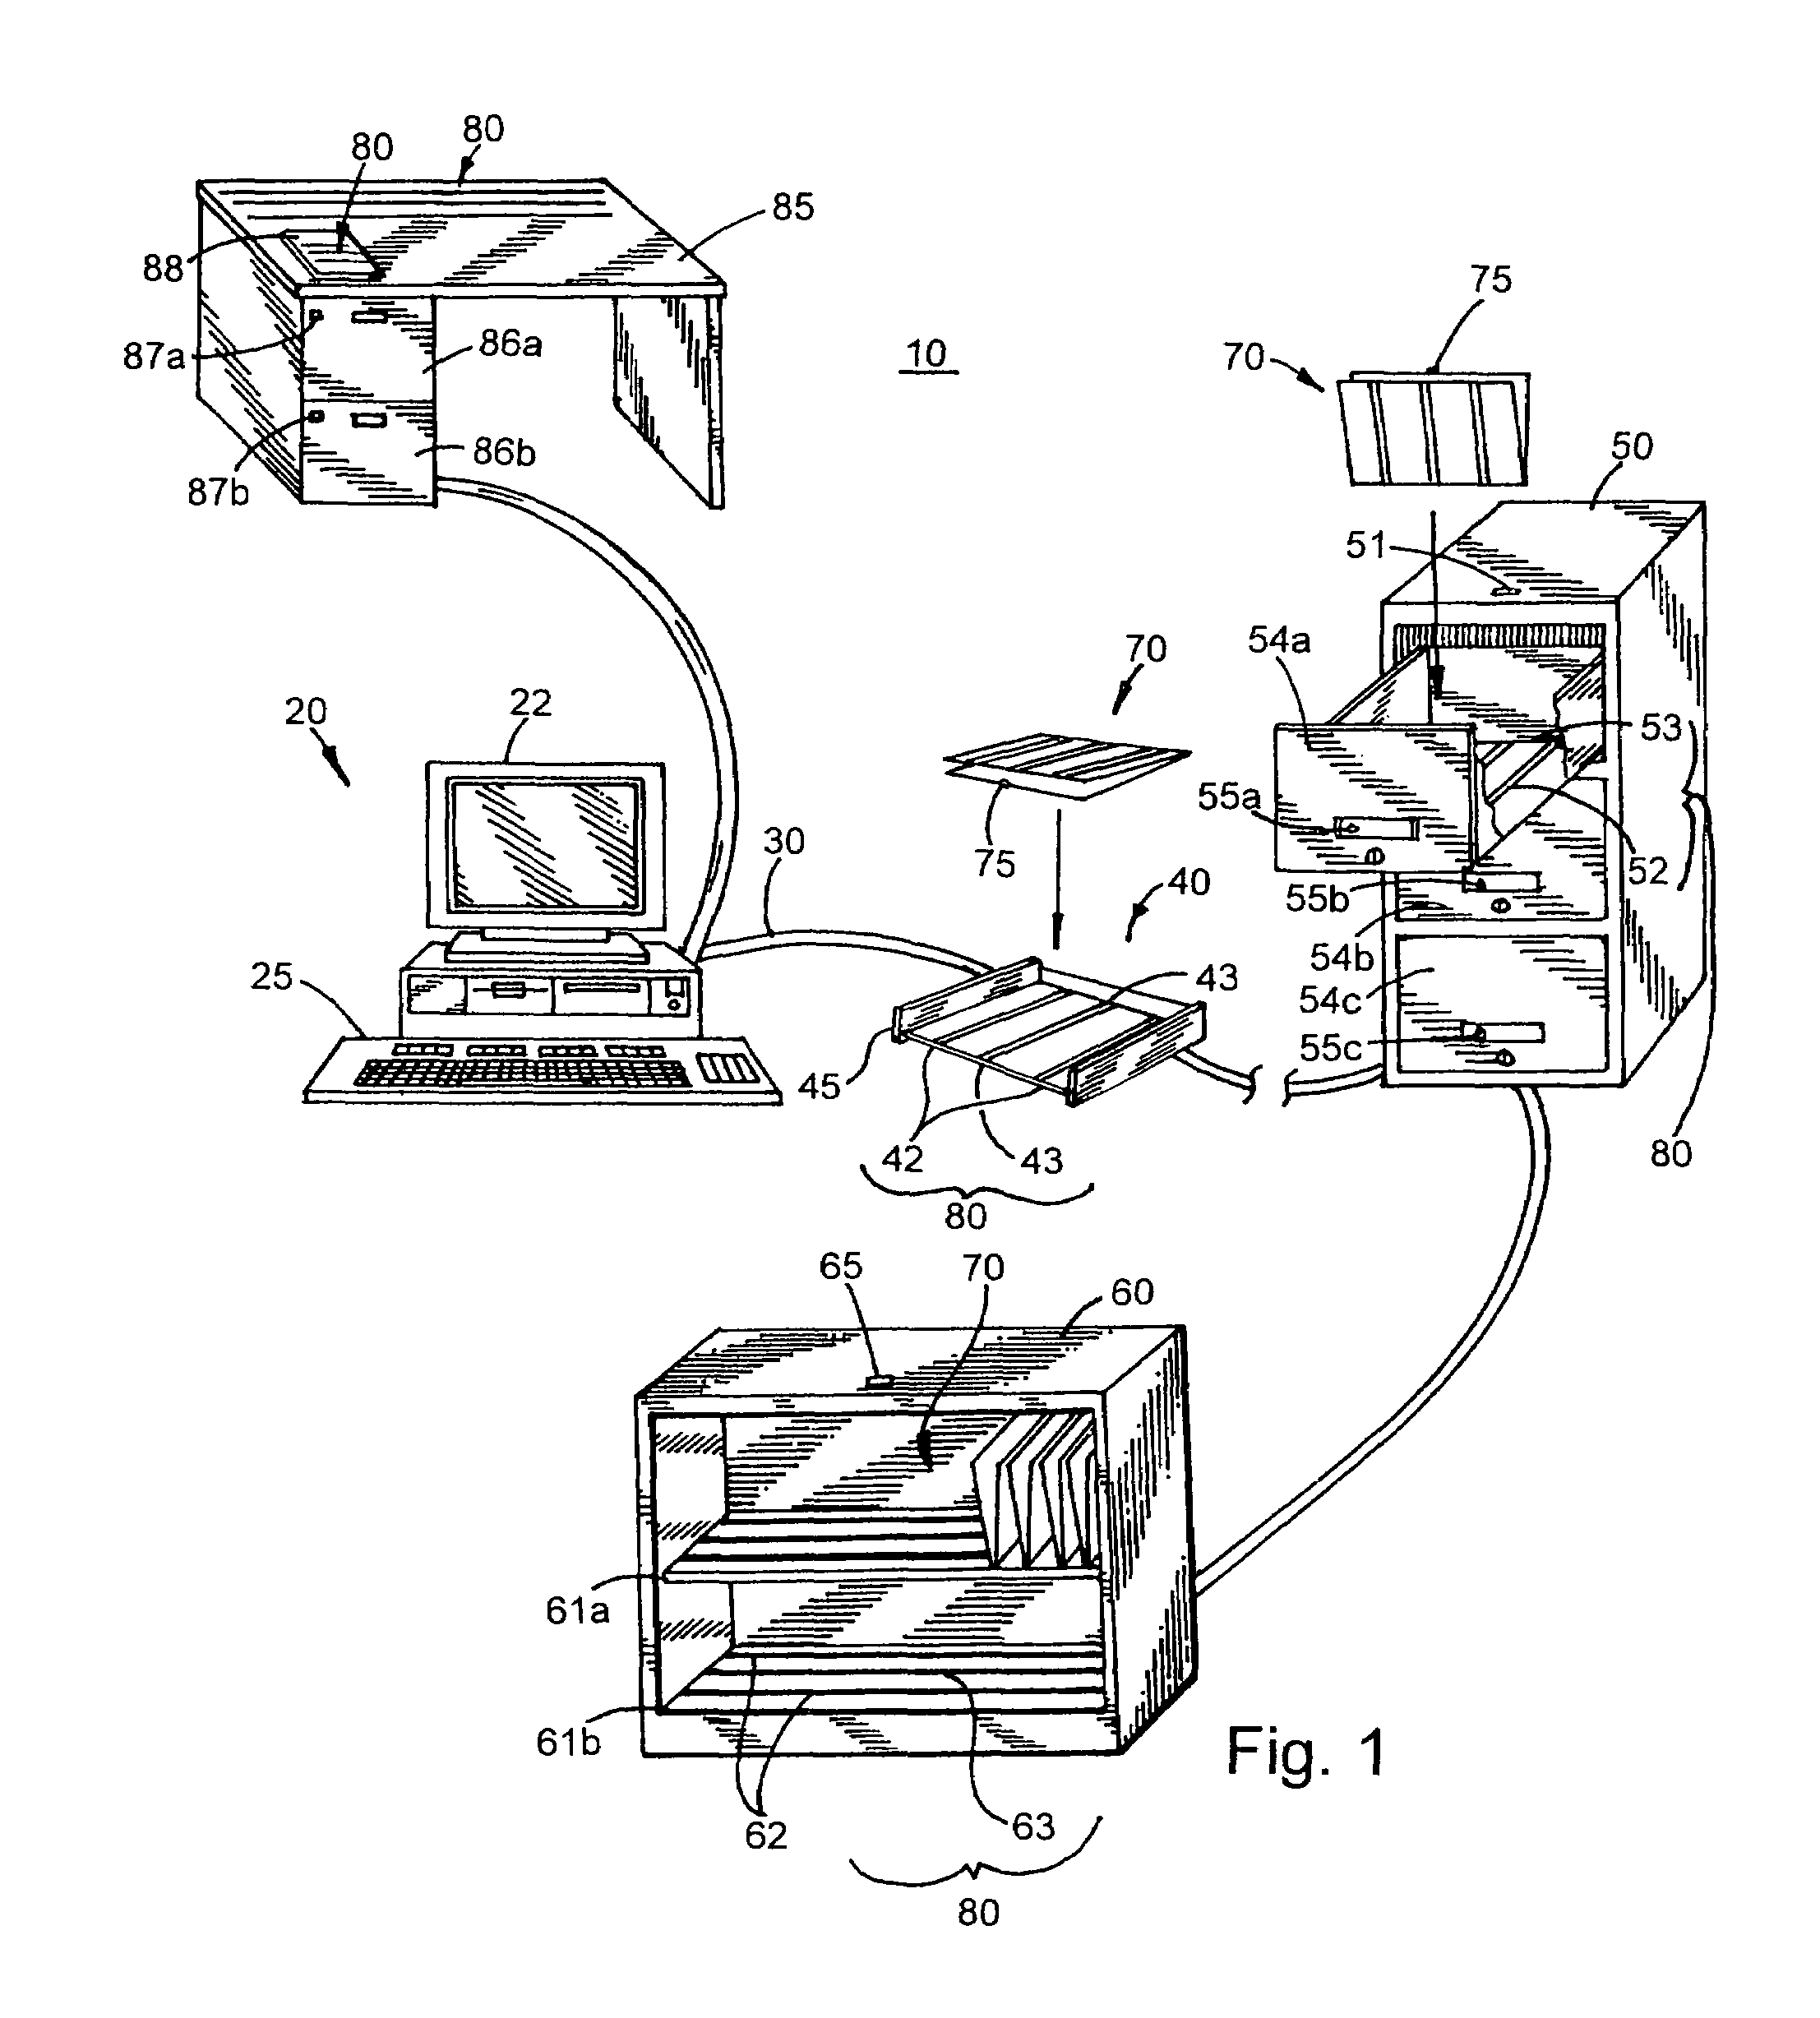 Electronic system, components and method for tracking files